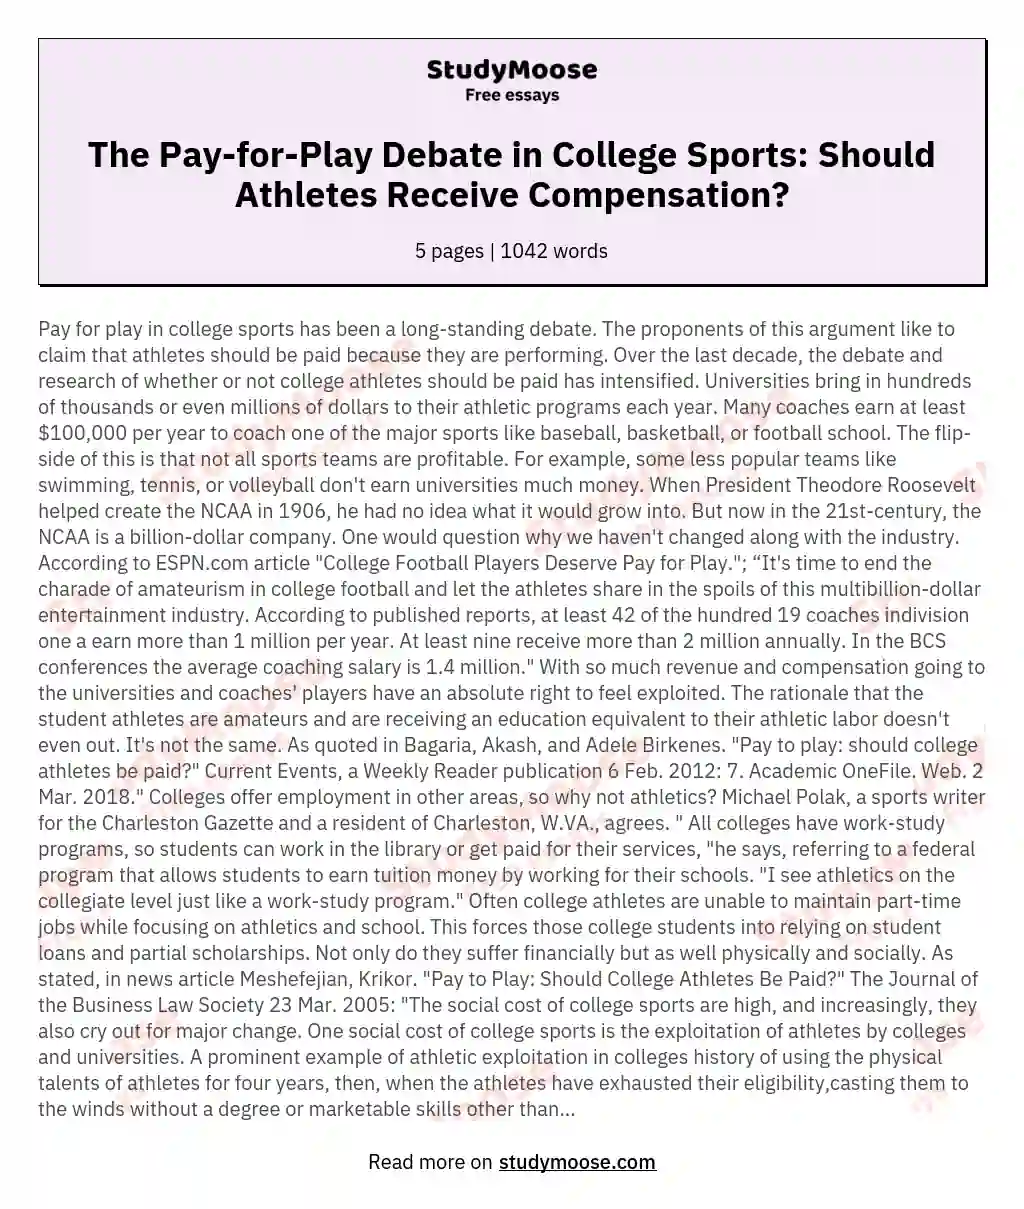 The Pay-for-Play Debate in College Sports: Should Athletes Receive Compensation? essay